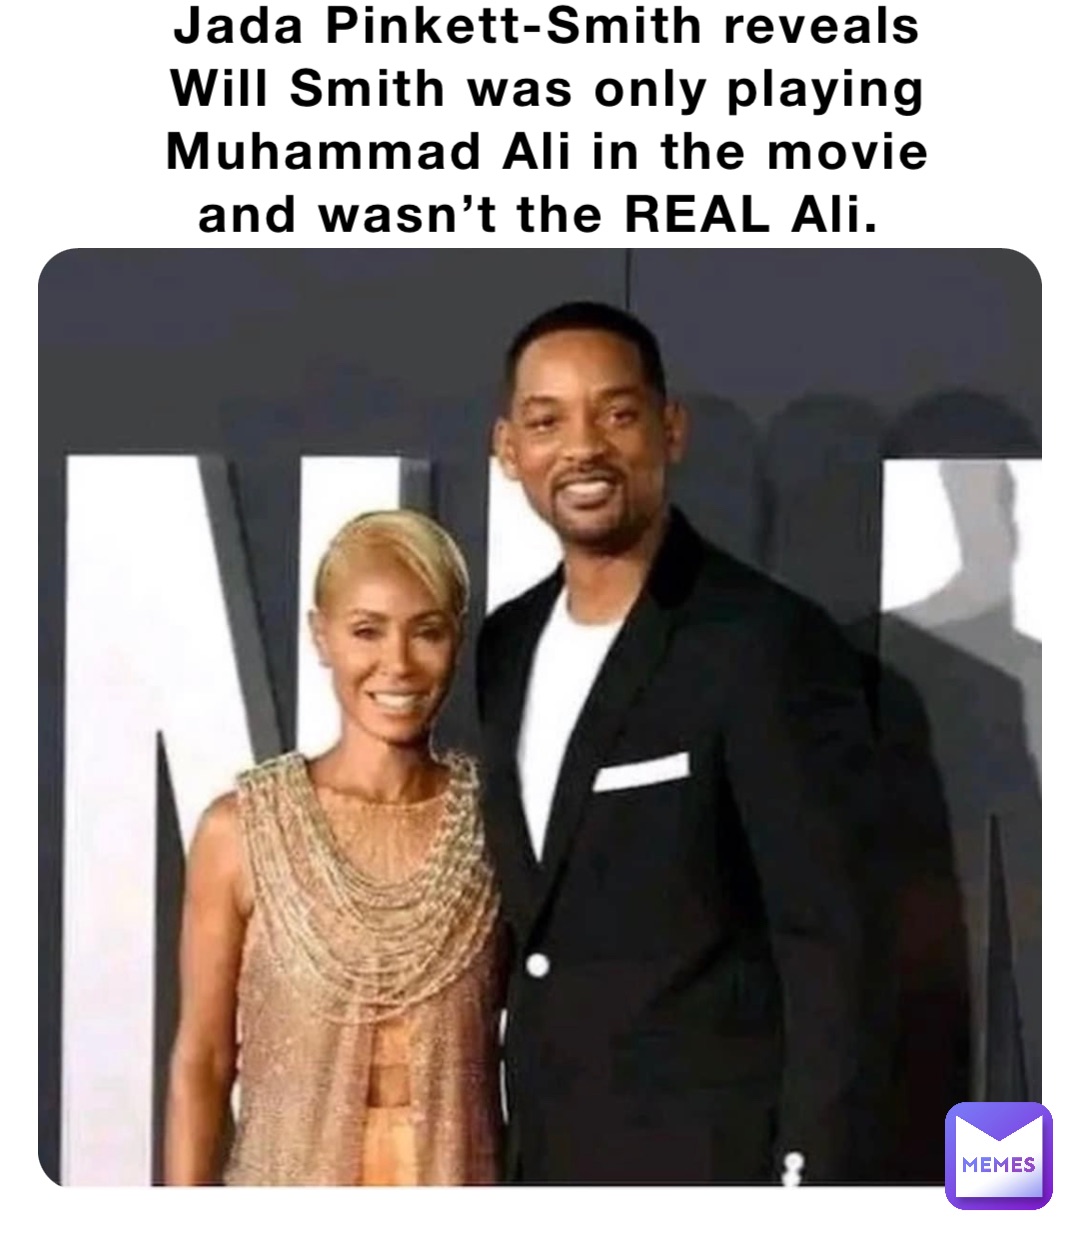 Jada Pinkett-Smith reveals Will Smith was only playing Muhammad Ali in the movie and wasn’t the REAL Ali.